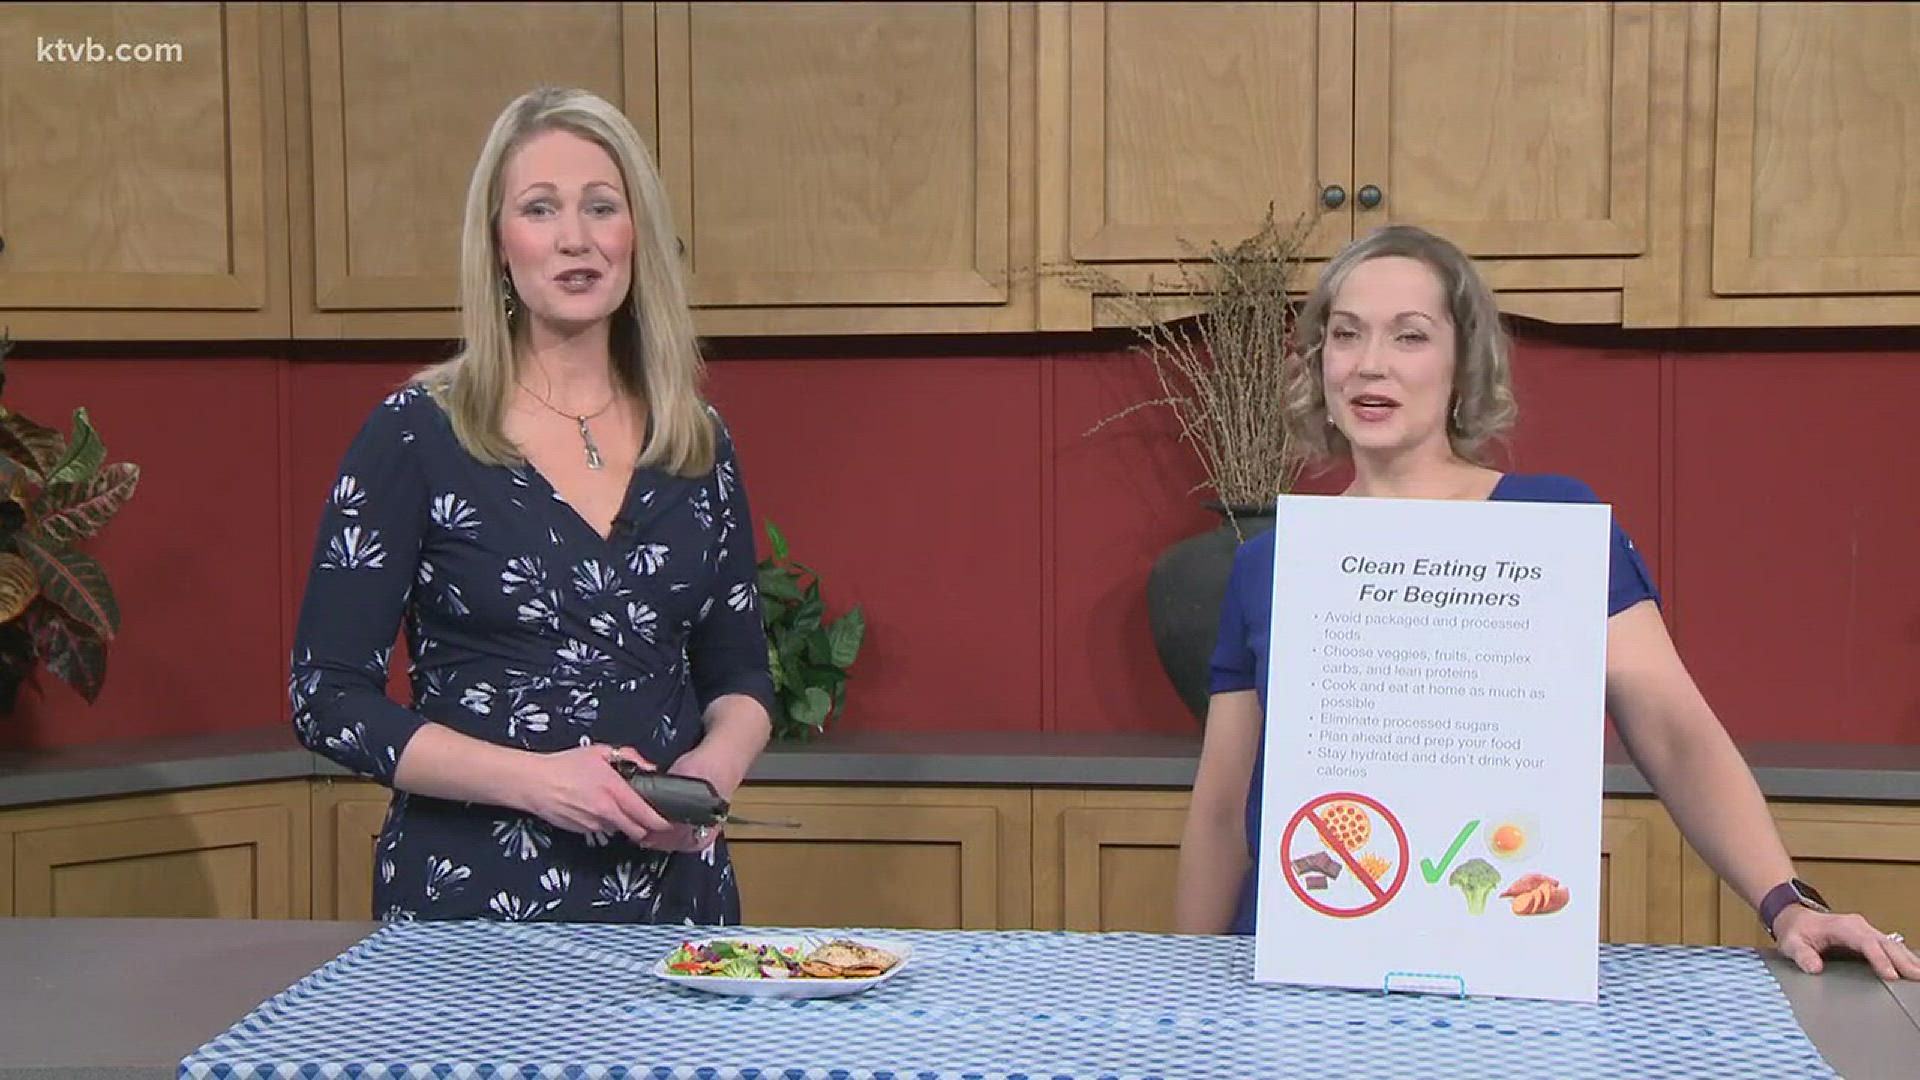 Katie Hug shows us some easy ways to eat clean.